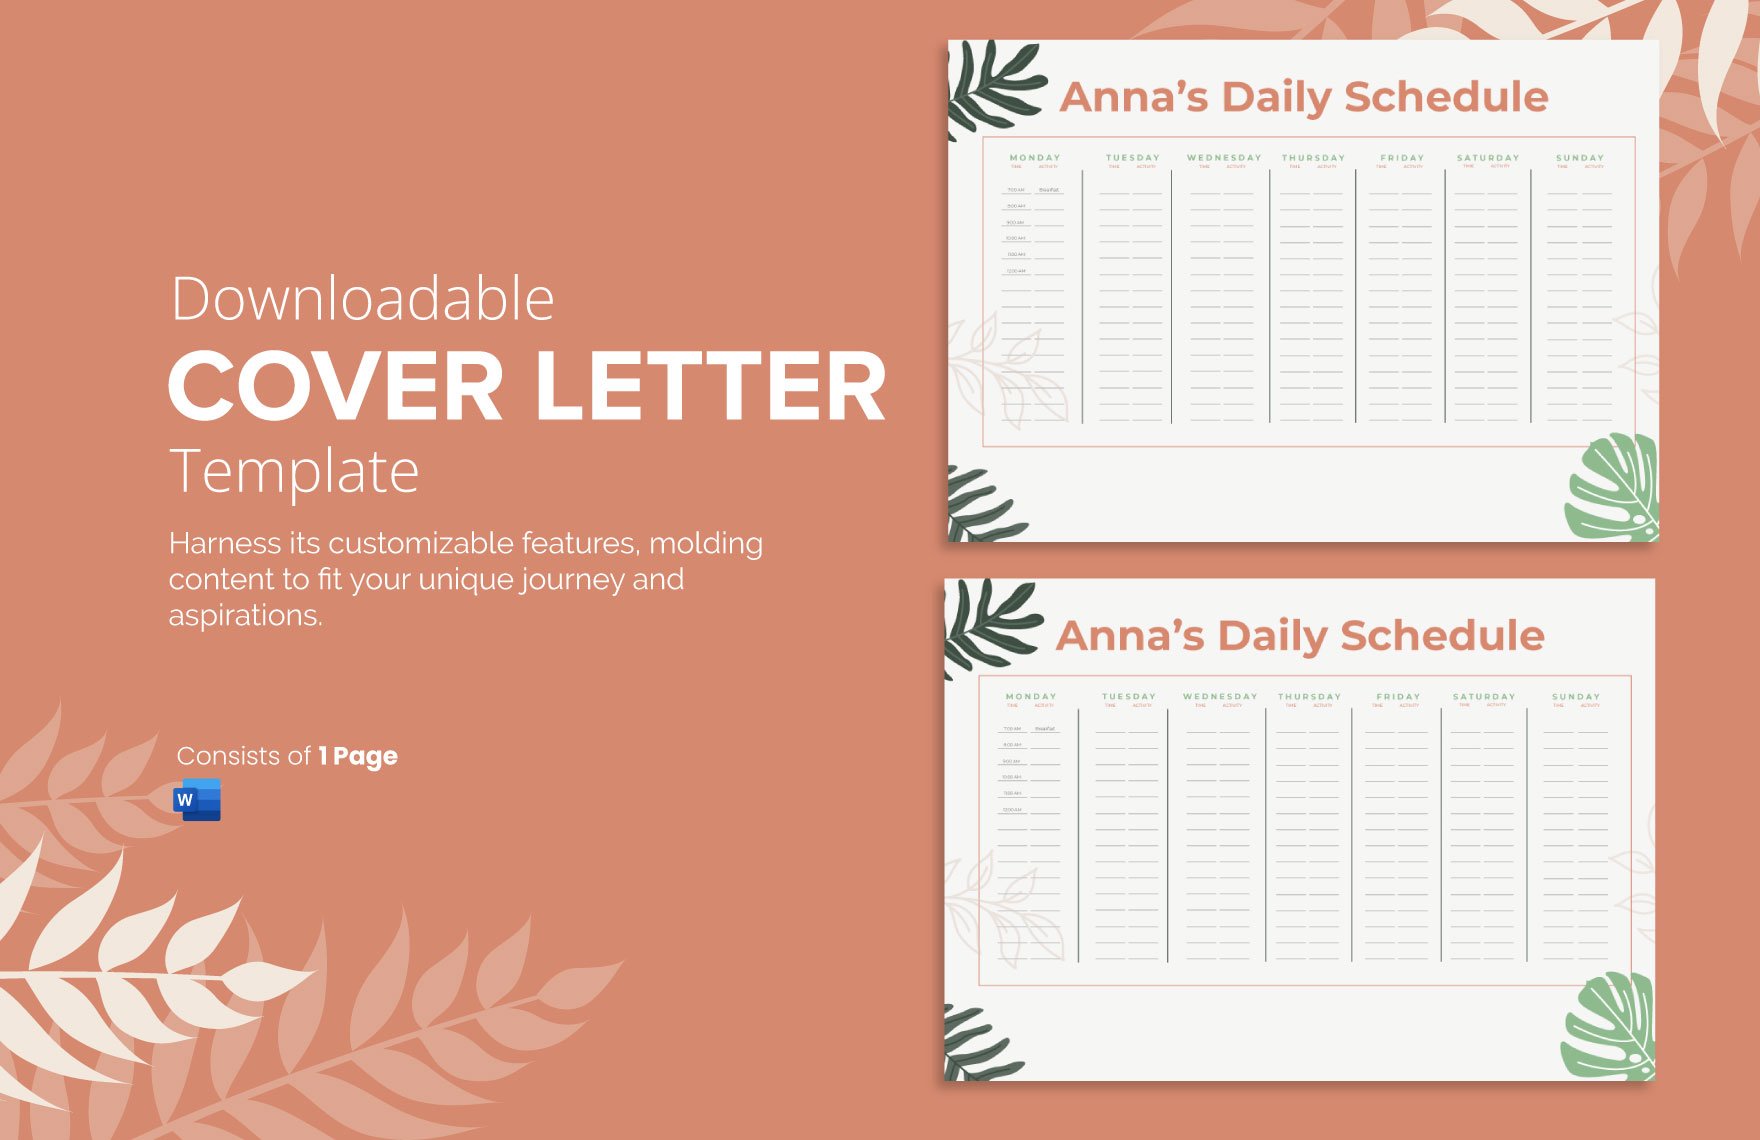 Free Downloadable Daily Schedule Template